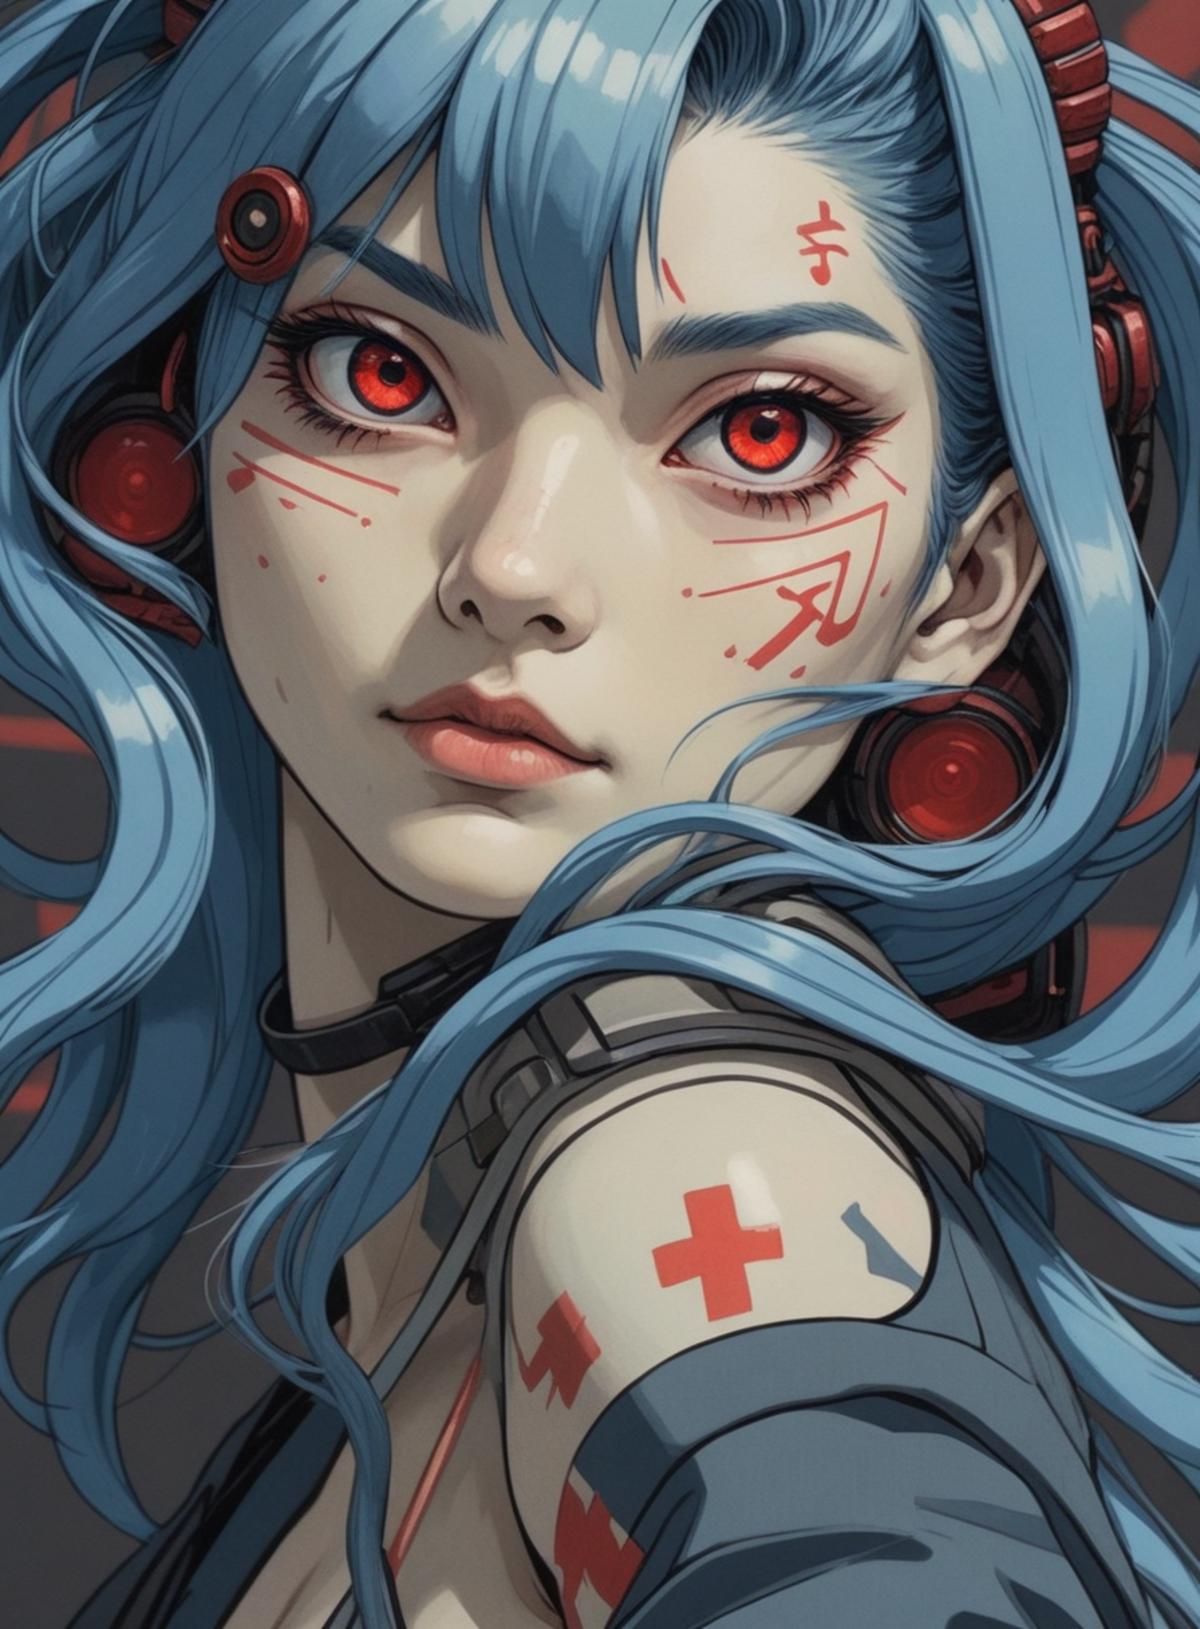 Artistic drawing of a woman with blue hair, red eyes, and a cross tattoo on her arm.